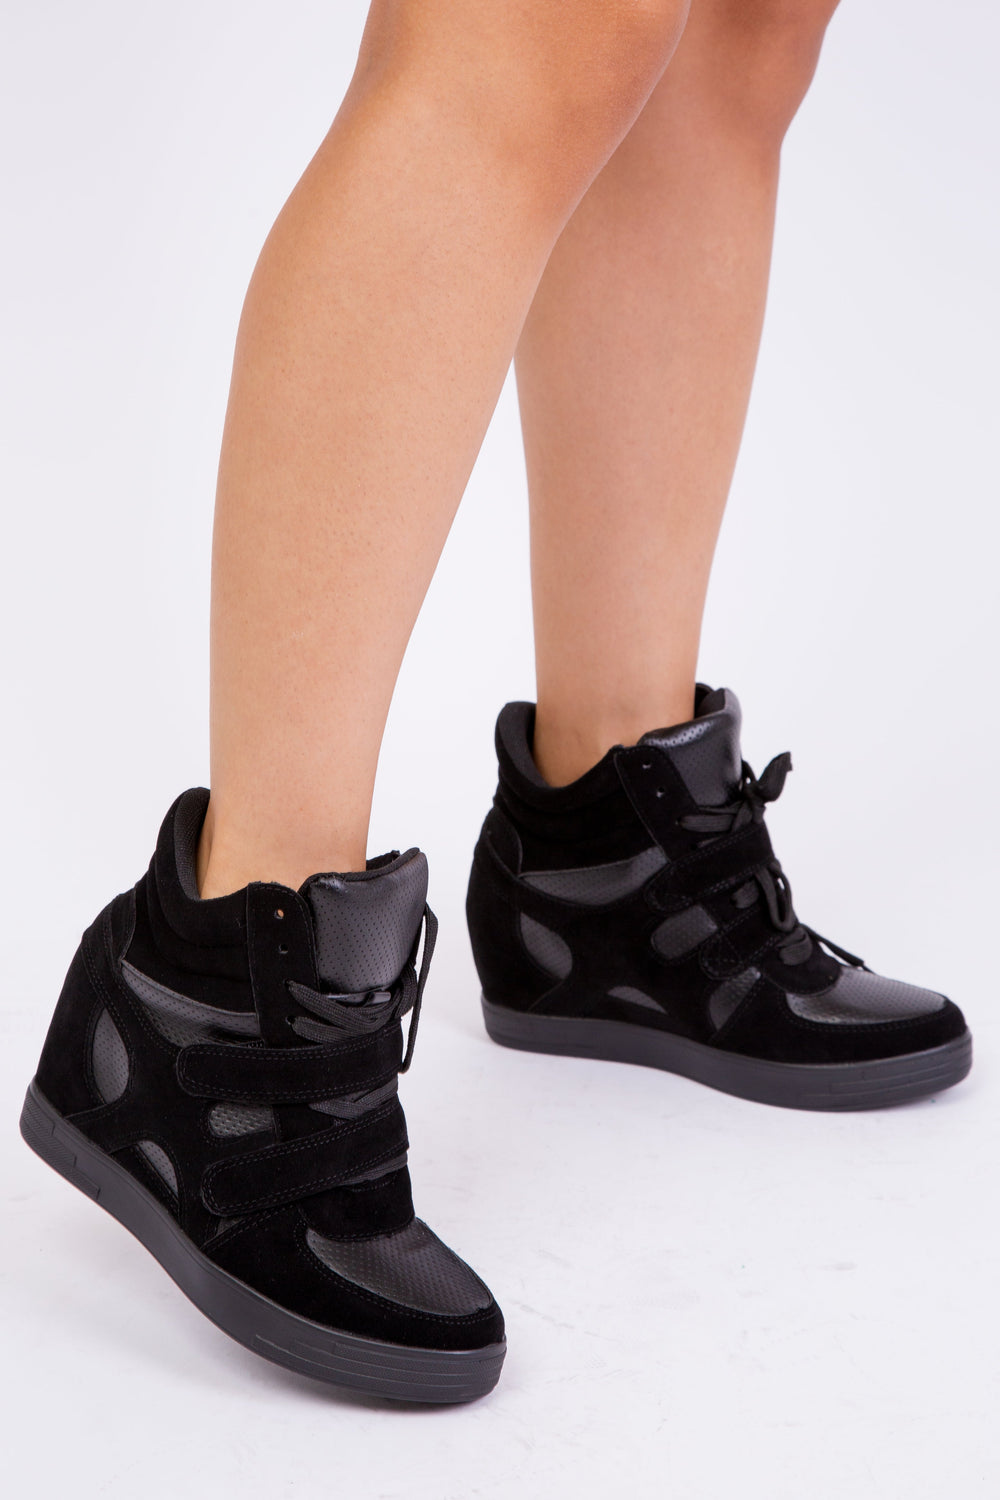 HITOP WEDGE TRAINERS WITH A FRONT LACE UP IN BLACK SUEDE